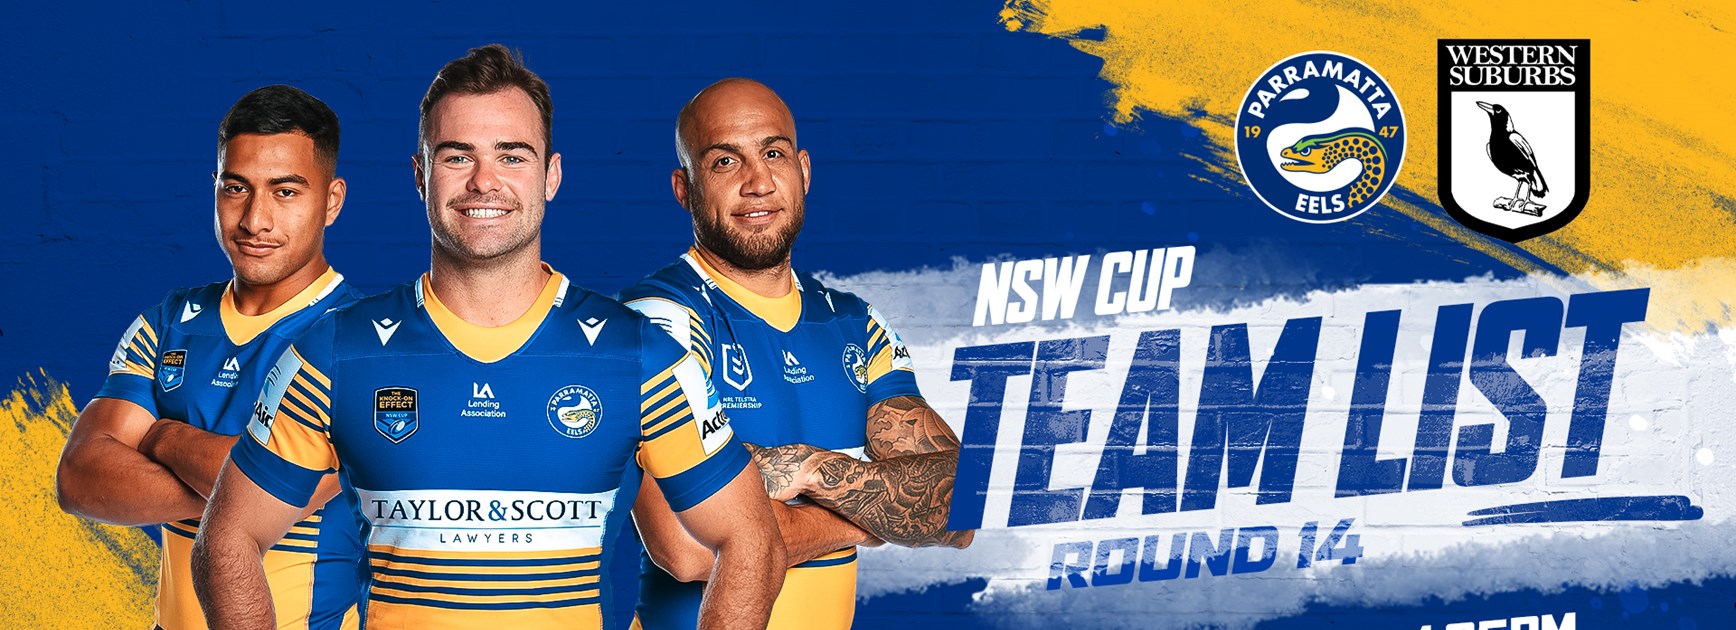 NSW Cup Team List - Eels v Magpies, Round 14